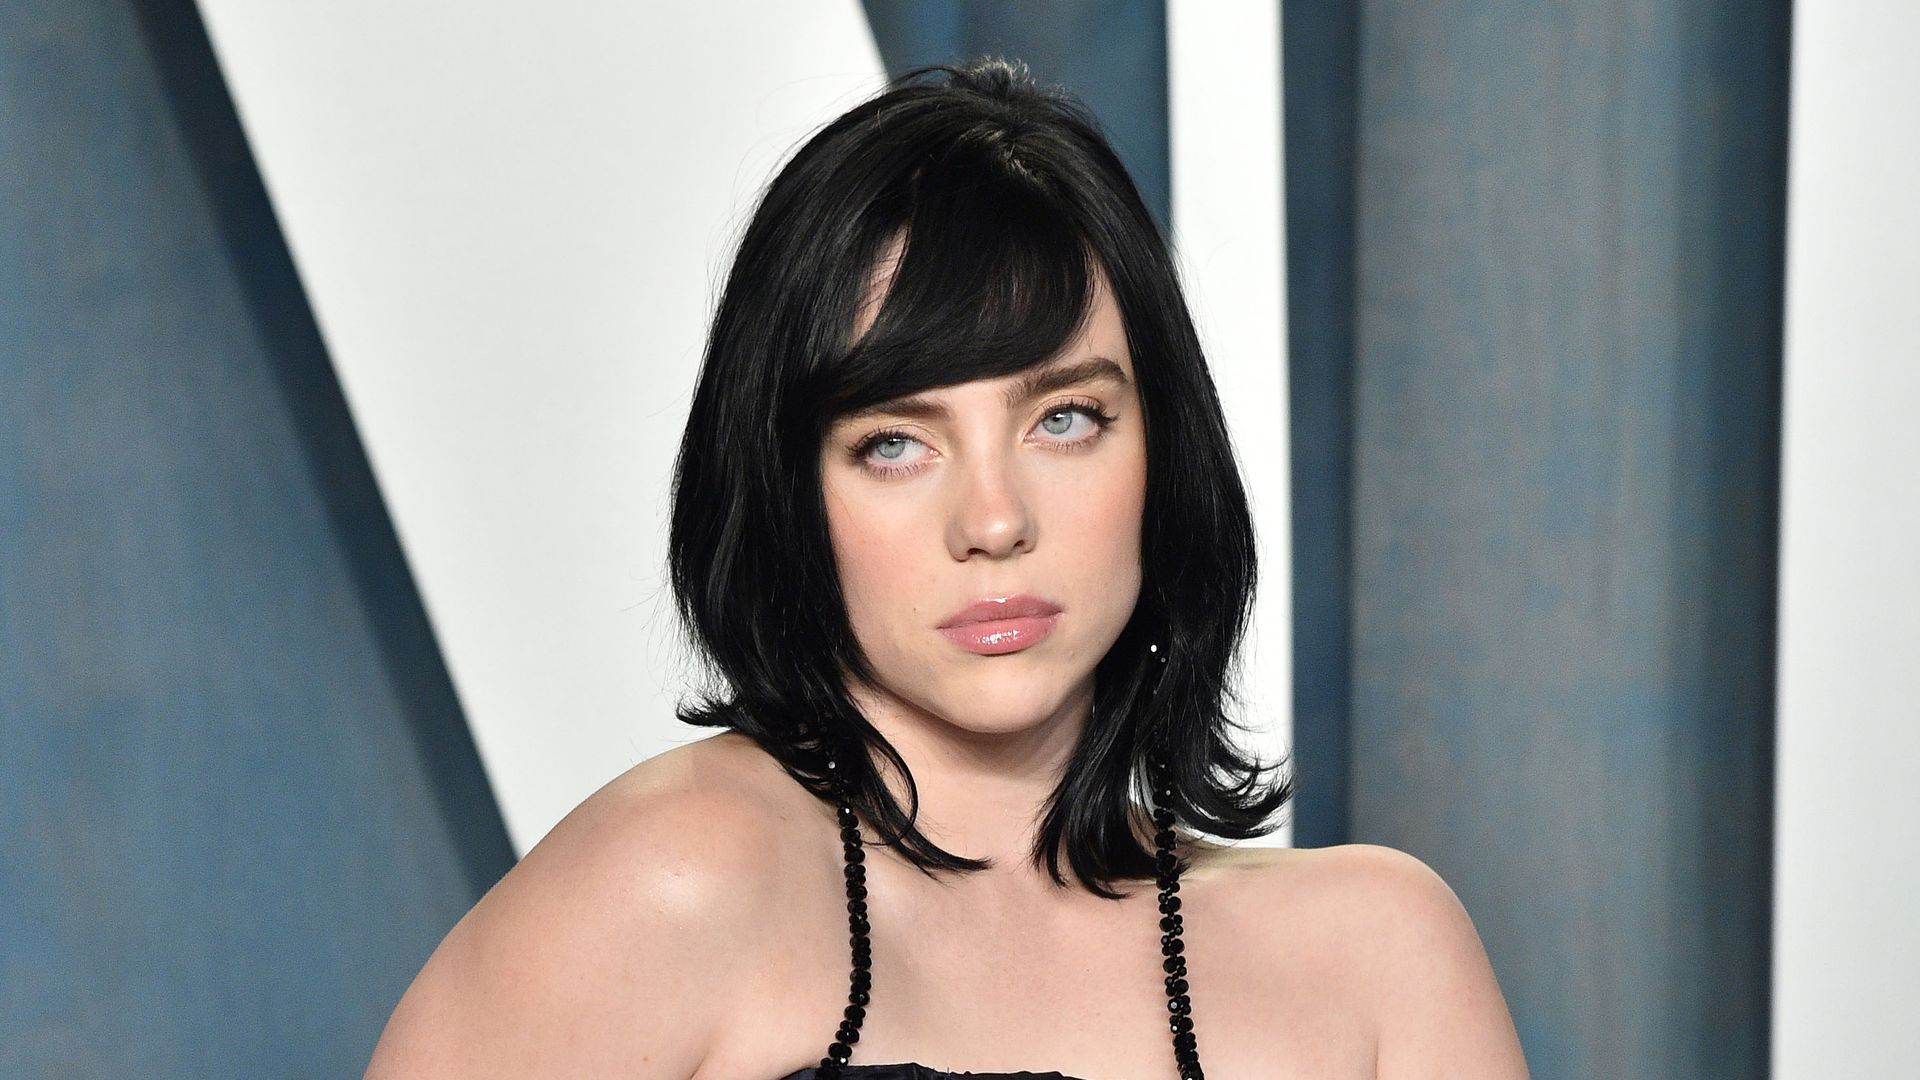 Billie Eilish attends the 2022 Vanity Fair Oscar Party hosted by Radhika Jones at Wallis Annenberg Center for the Performing Arts on March 27, 2022 in Beverly Hills, California.